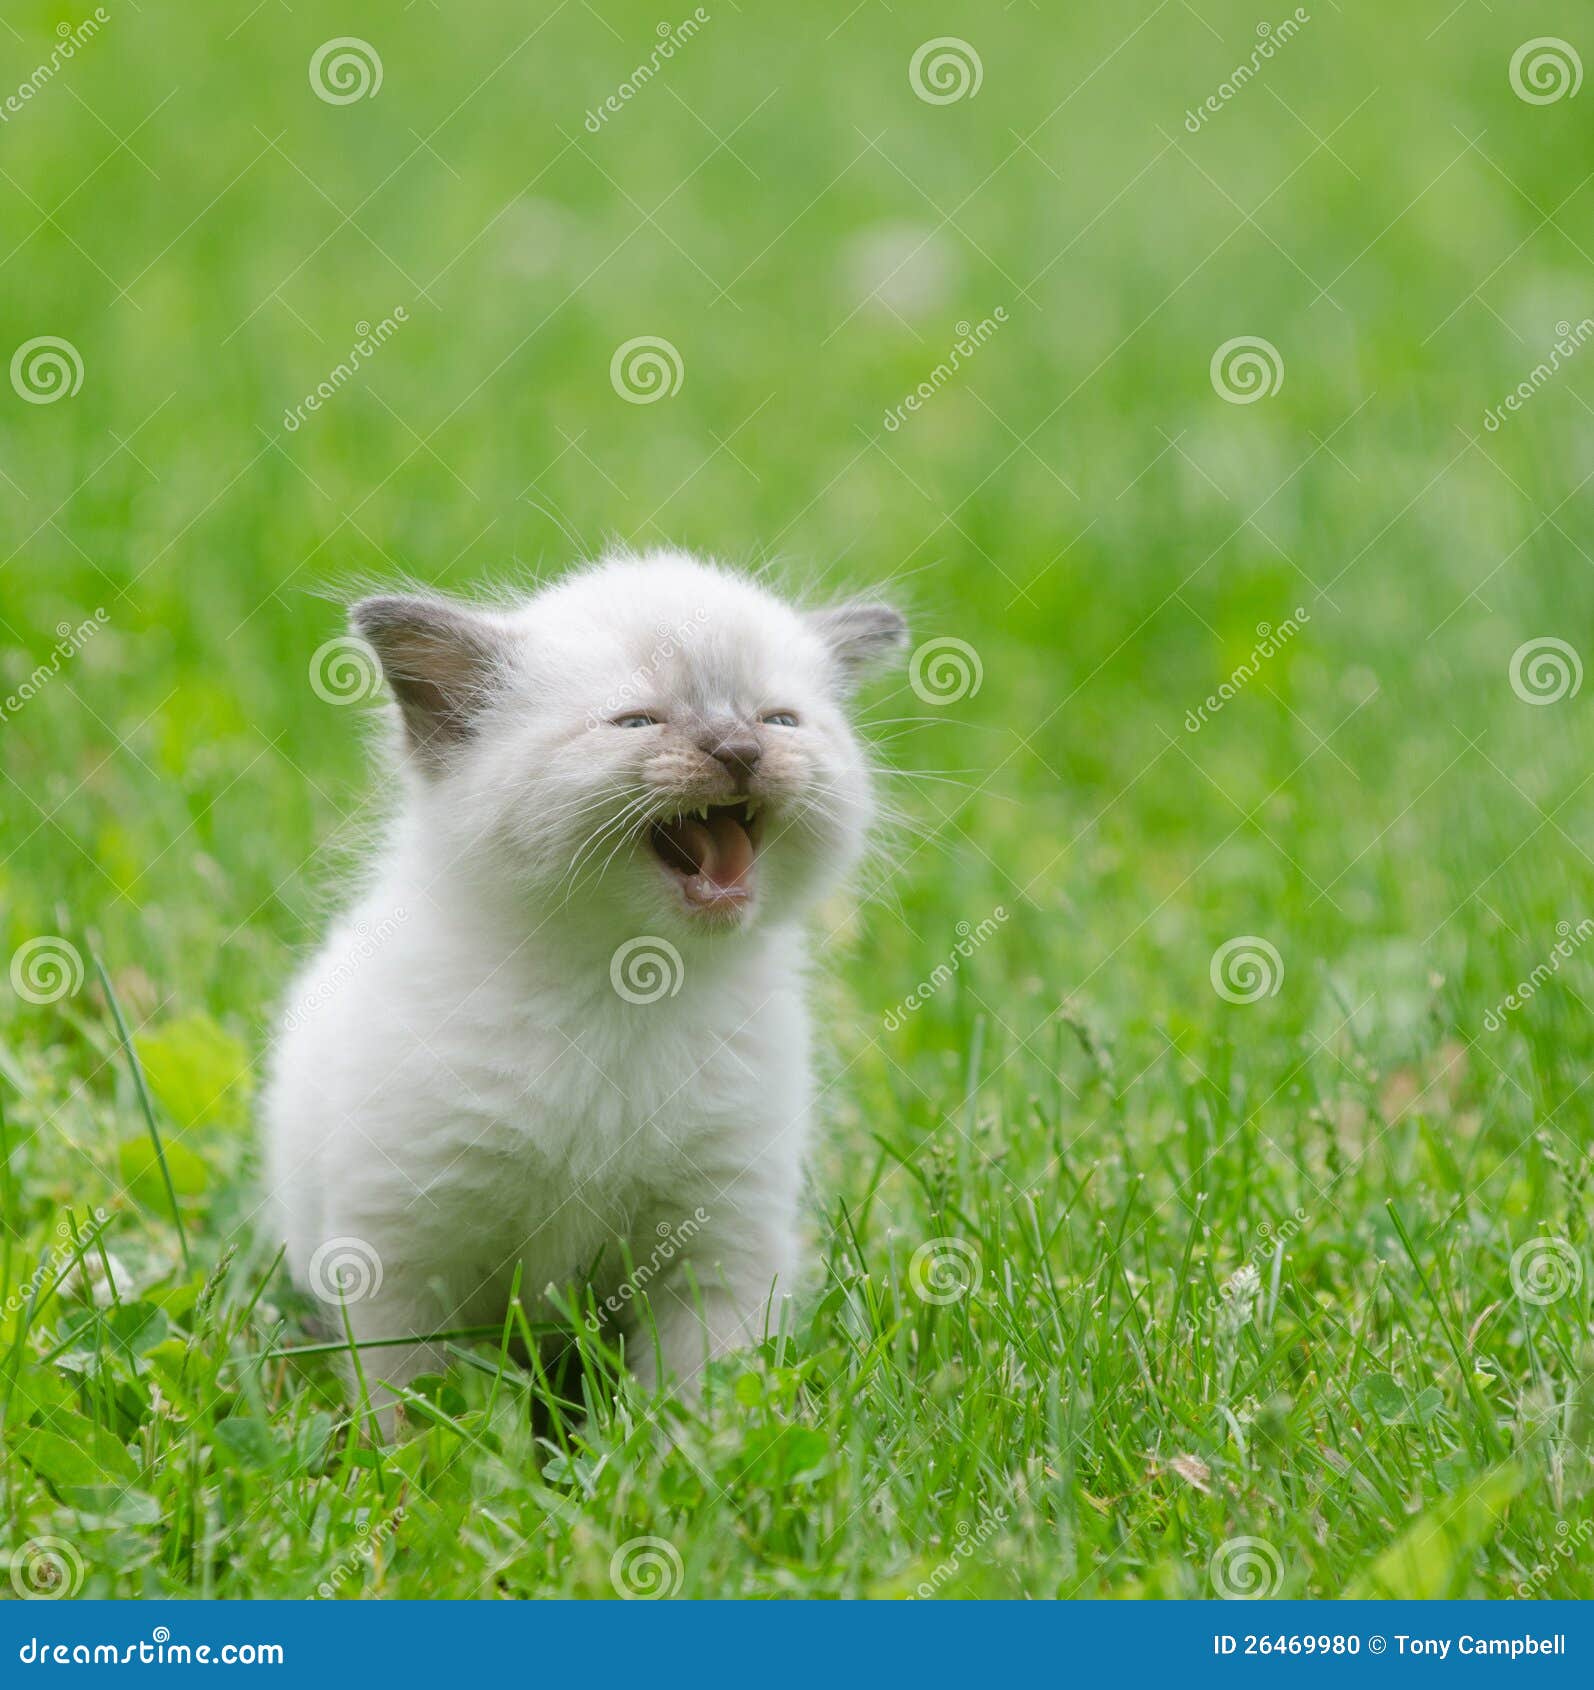 Cute Baby Kitten in the Grass Stock Photo - Image of nature ...